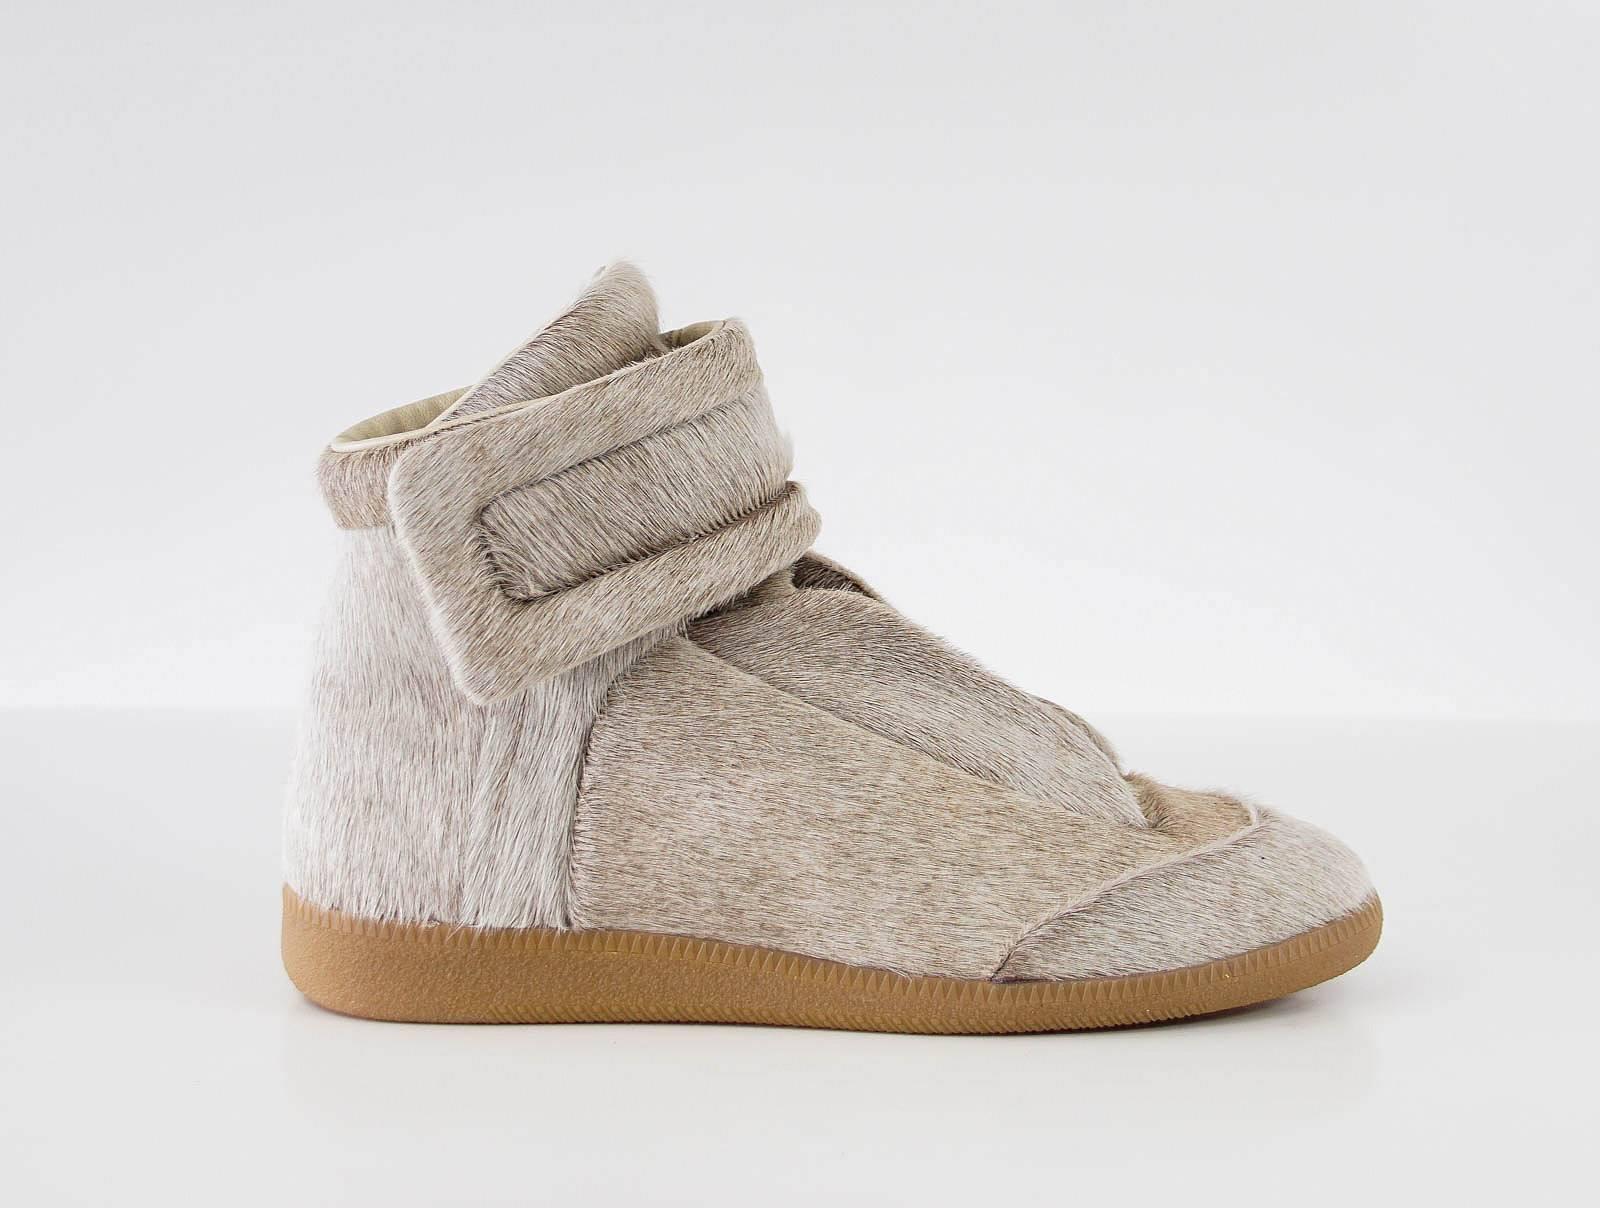 Guaranteed authentic MAISON MARTIN MARGIELA men's high top sneaker in sanded grey pony.
Lace up front with lace guards on the sides.
Velcro closure grip straps around ankle.
Comes with signature box.
NEW or NEVER WORN. 
final sale

SIZE  43
USA SIZE